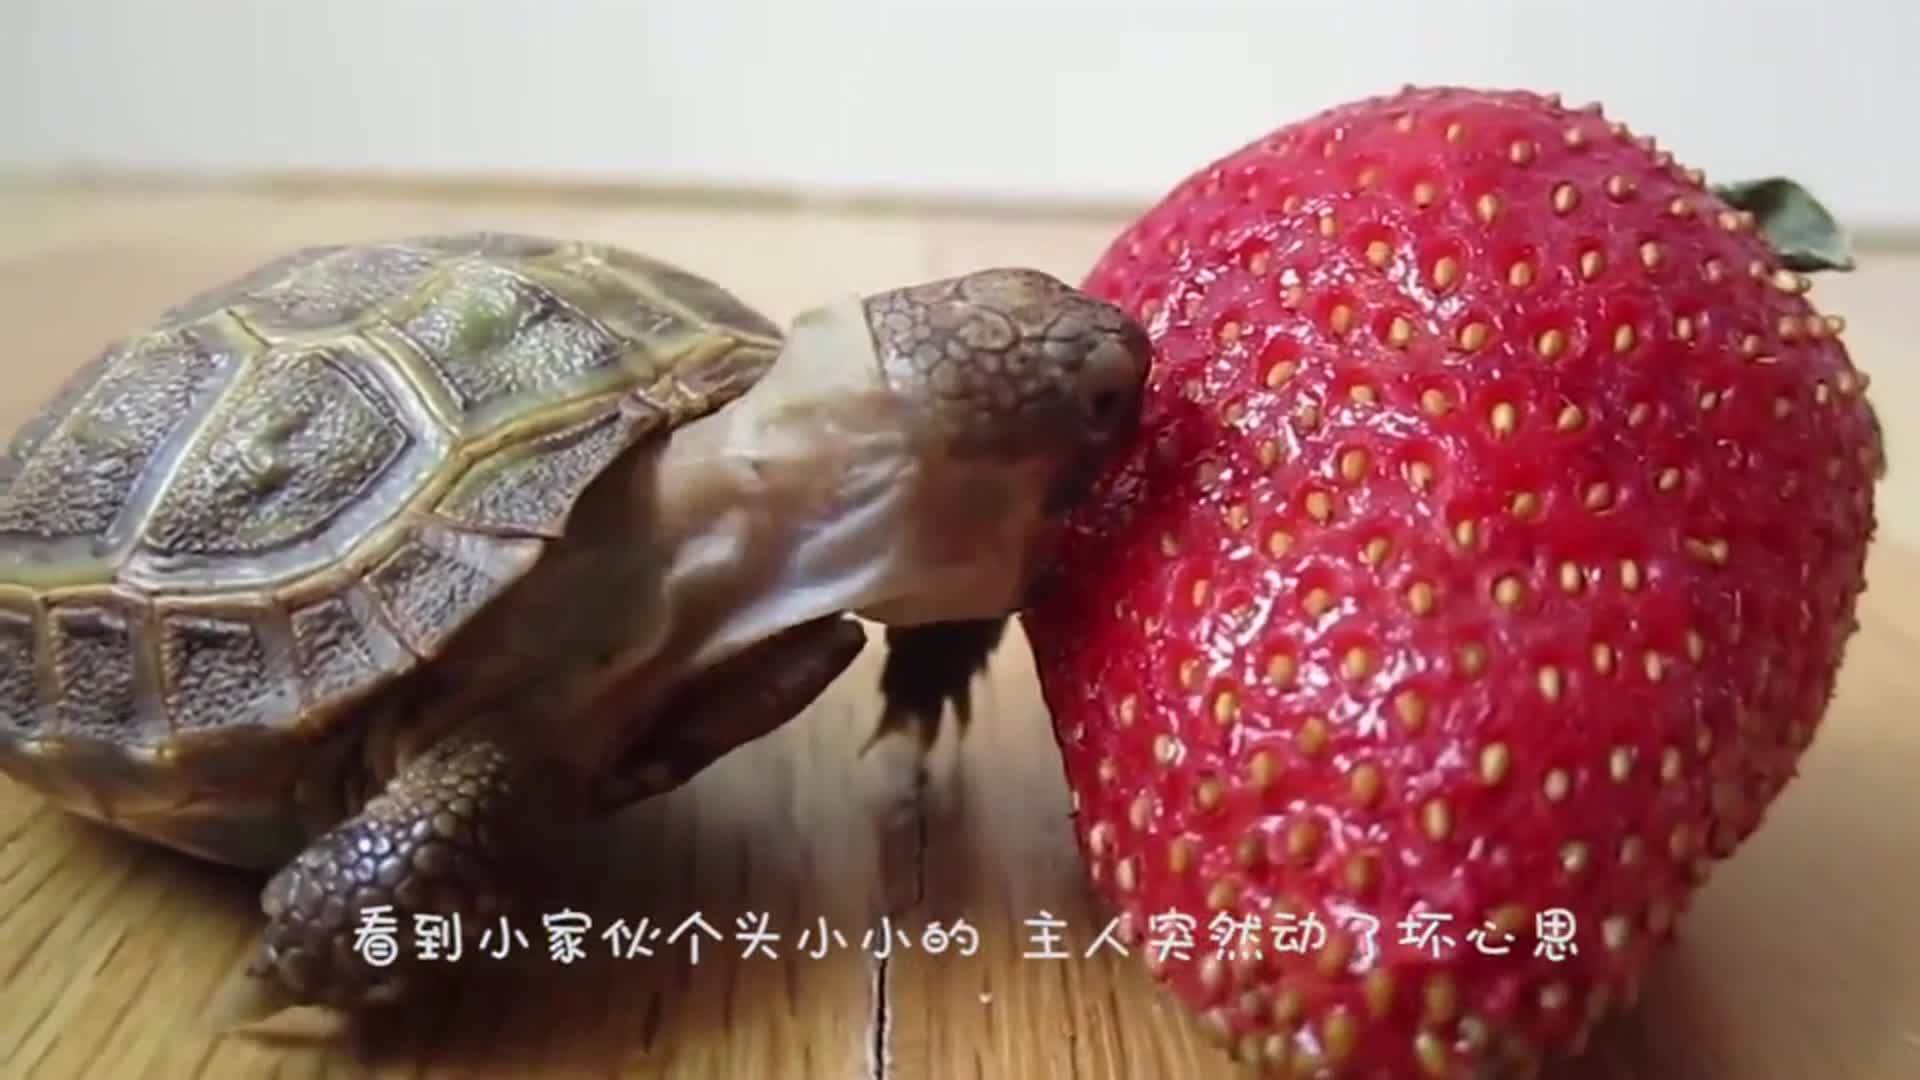 The owner feeds the turtle strawberries, stretches his neck and bites it constantly. Please hold back and stop laughing the next second.